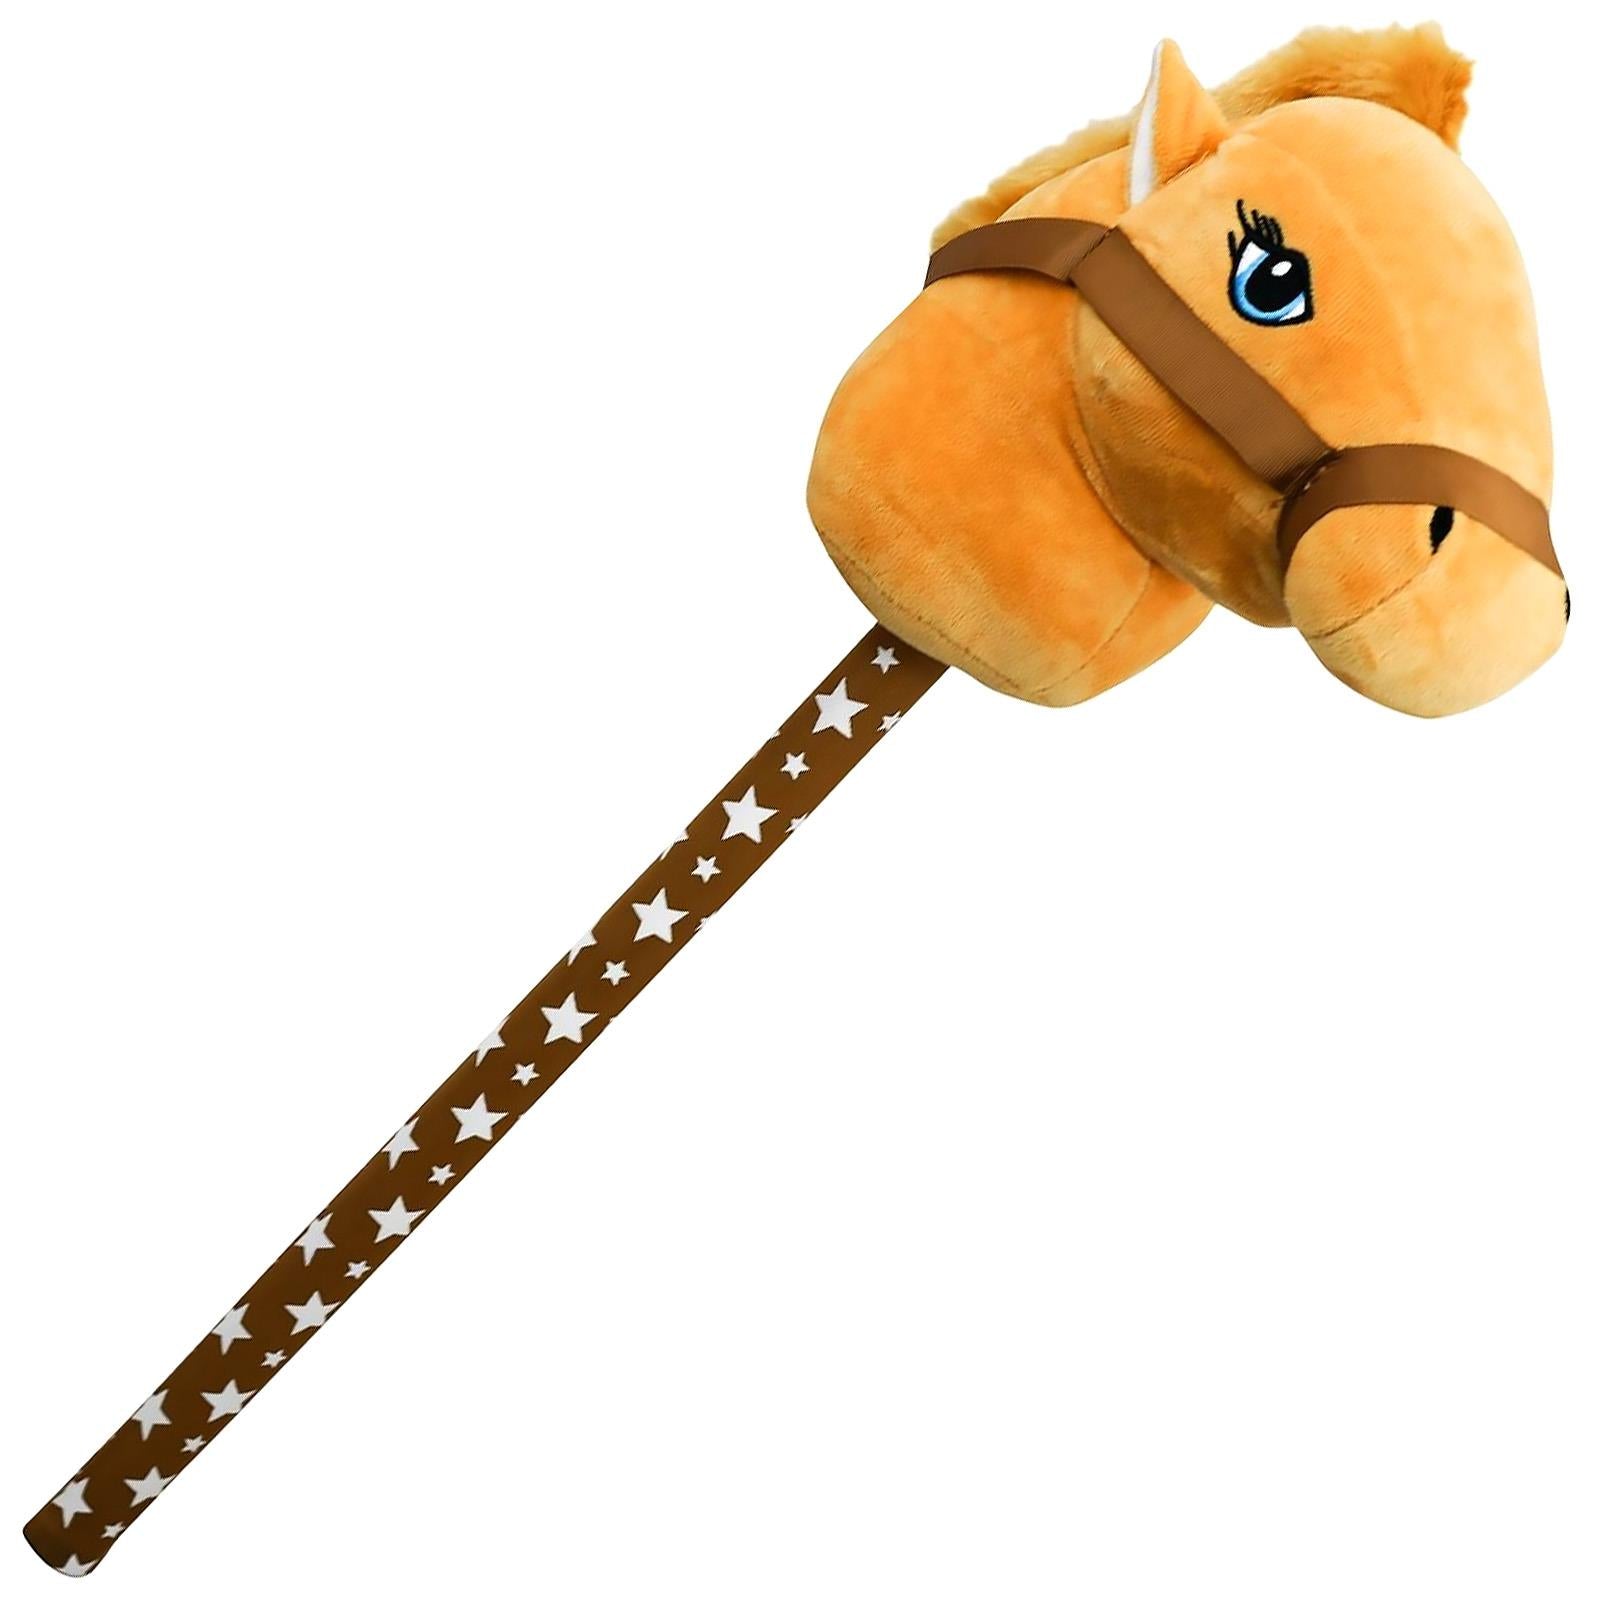 Kids Brown Hobby Horse With Sounds by The Magic Toy Shop - The Magic Toy Shop